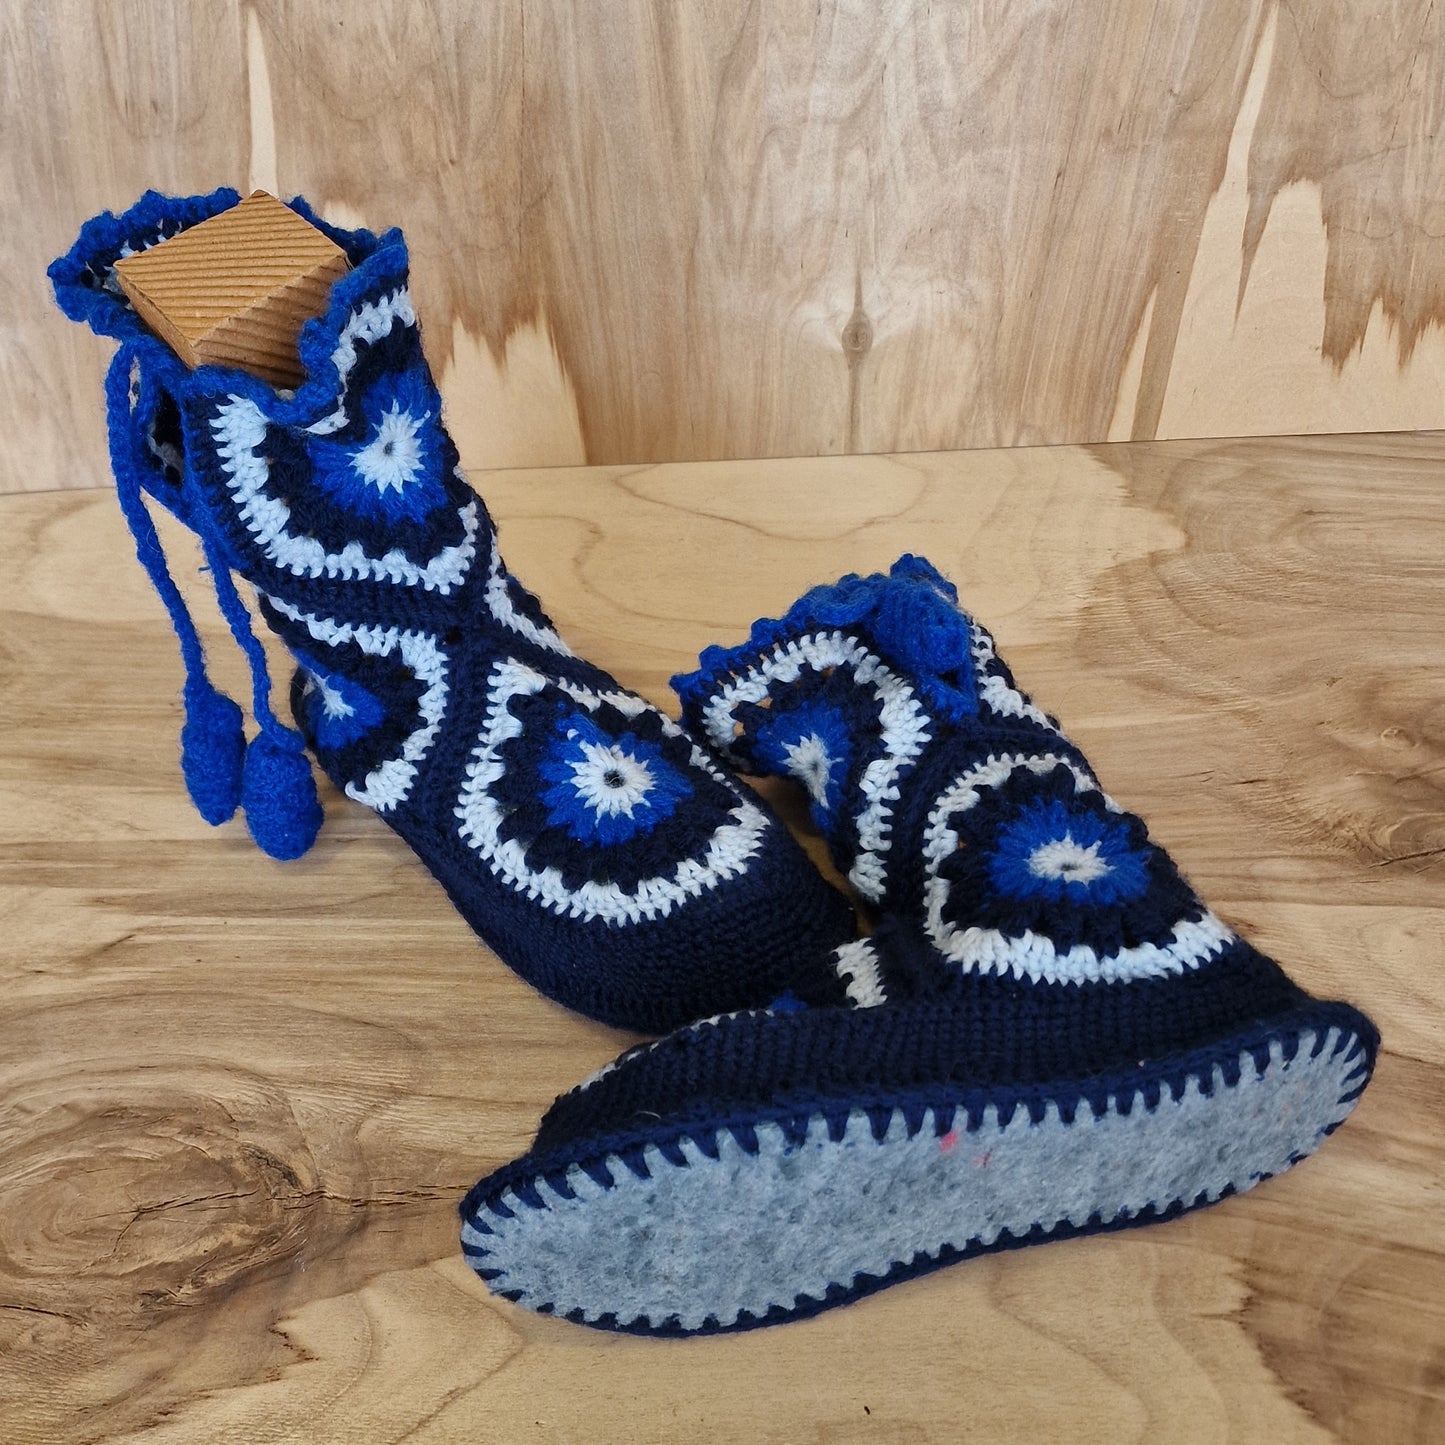 Hand crocheted booties/slippers size 36-37. in shades of blue (ME 4)